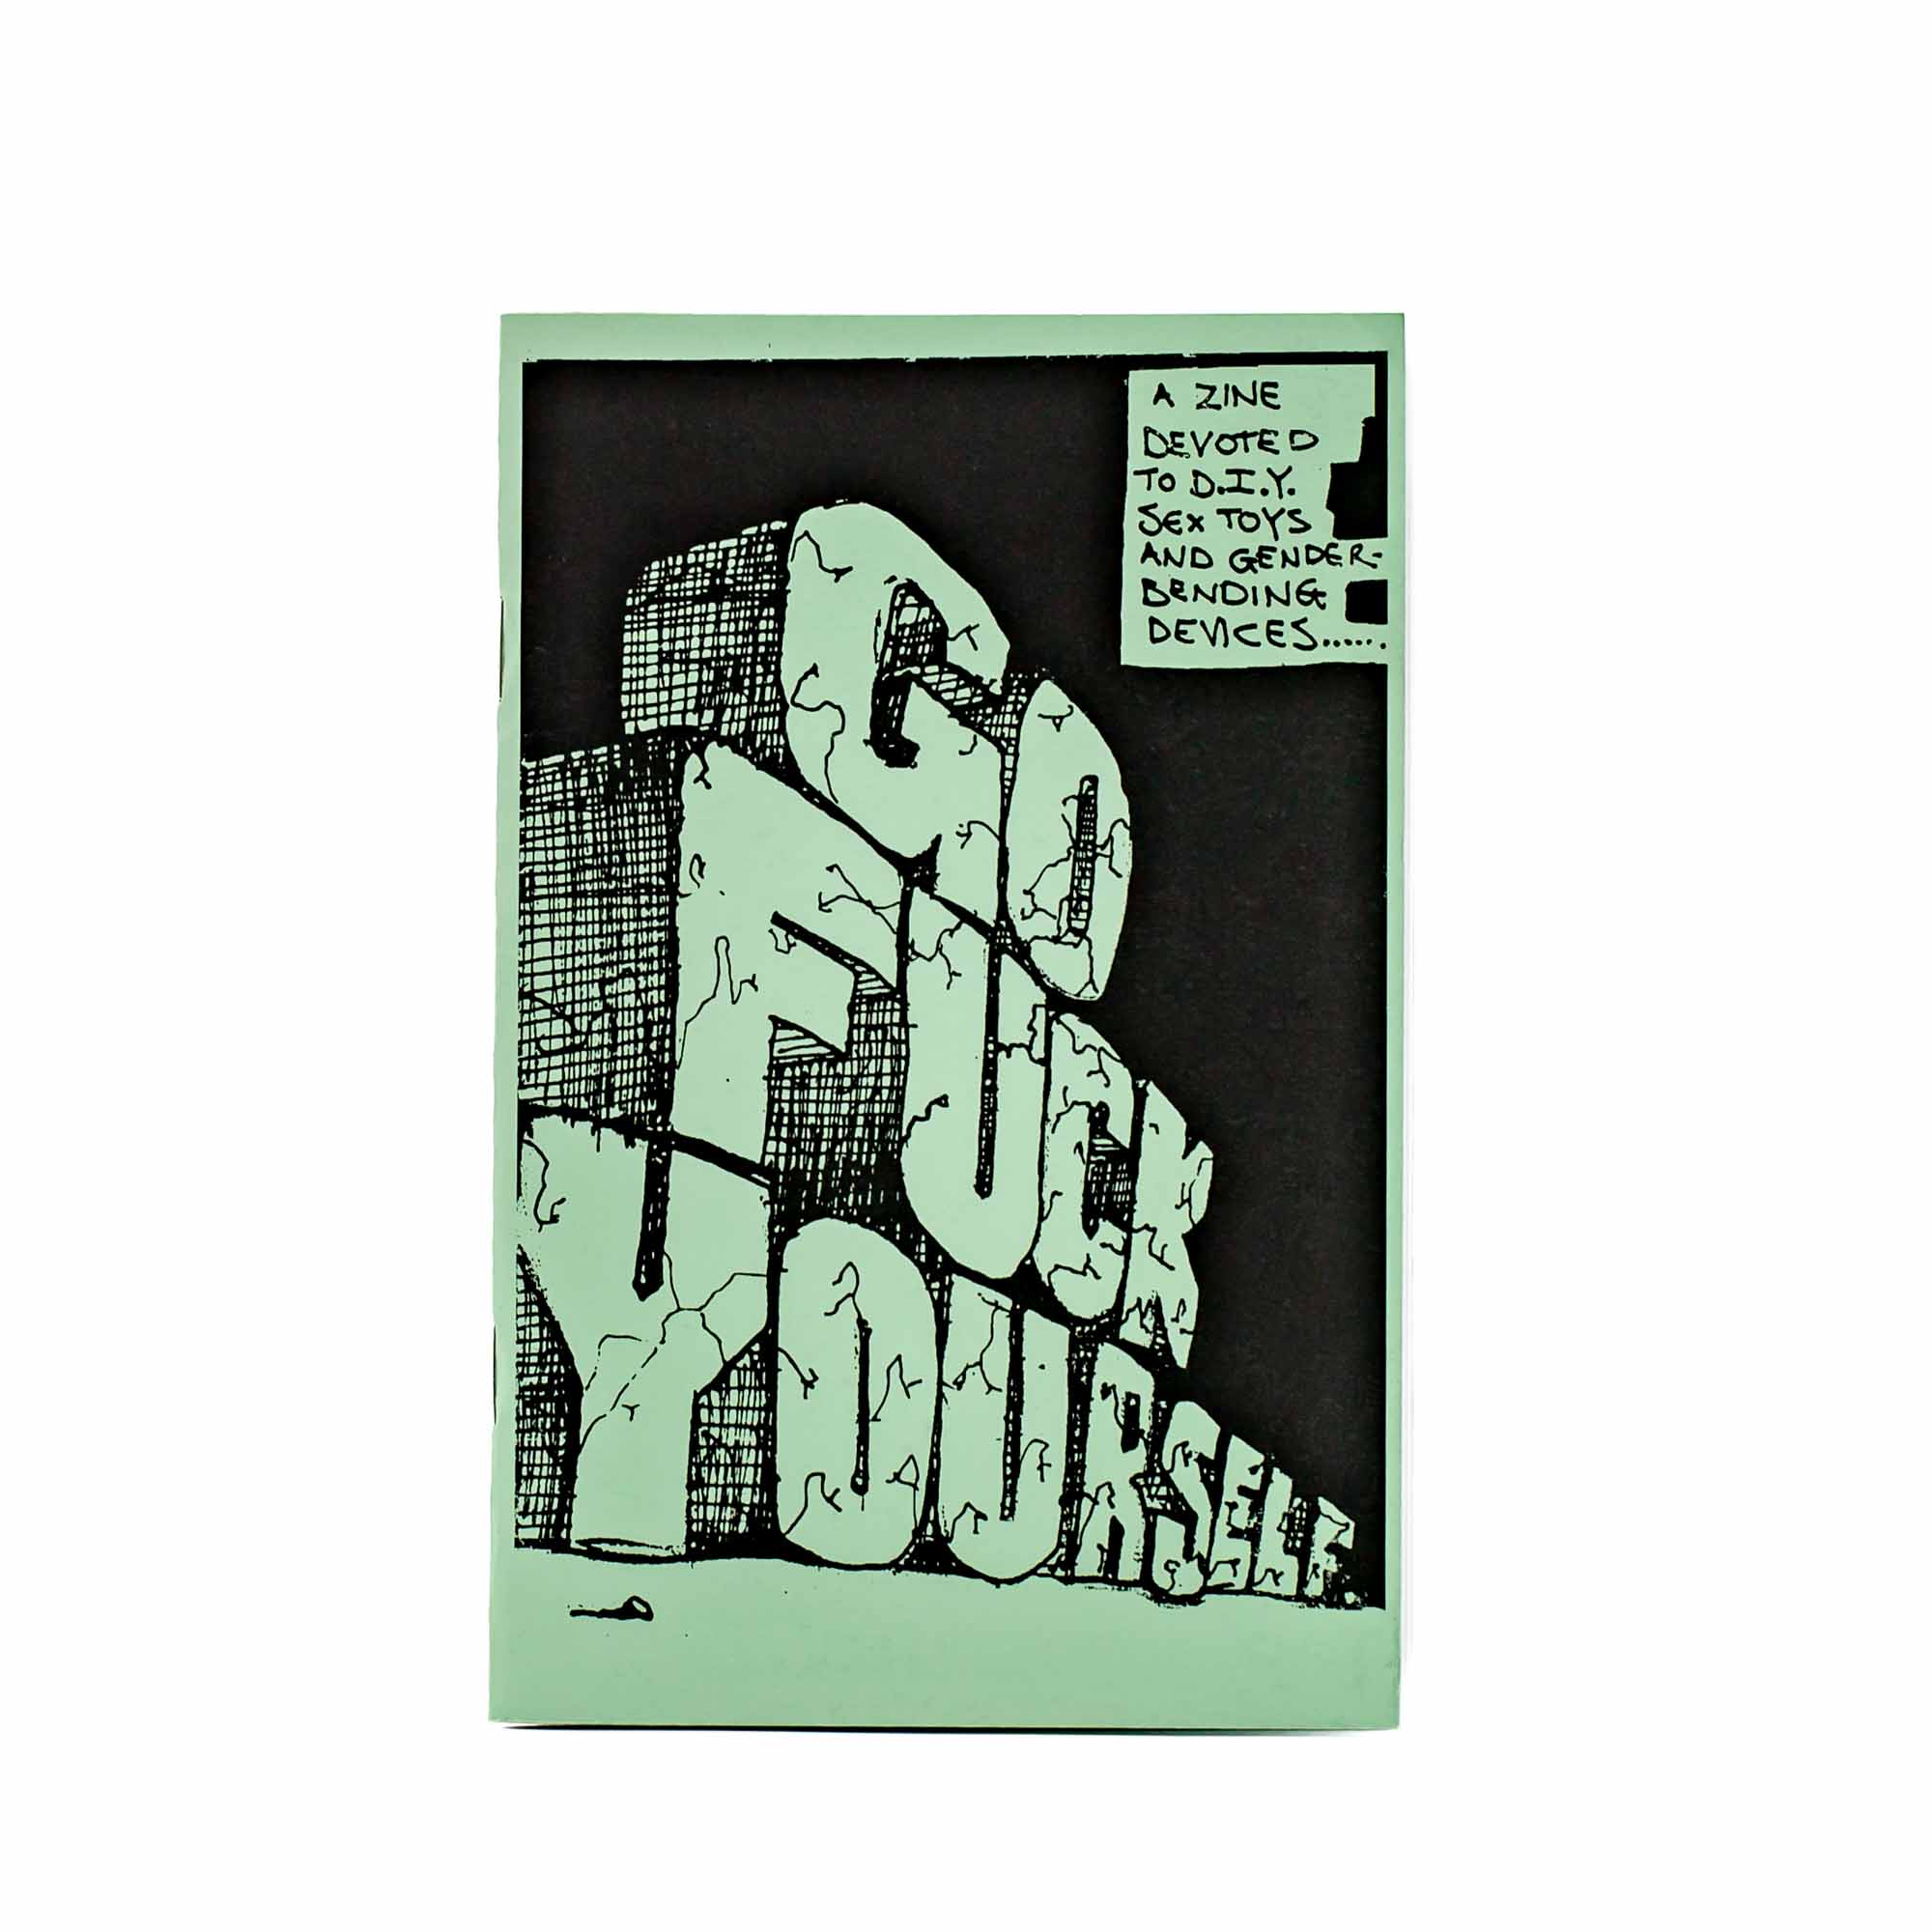 Go Fuck Yourself: A Zine Devoted to DIY Sex Toys and Gender-Bending Devices - Mortise And Tenon